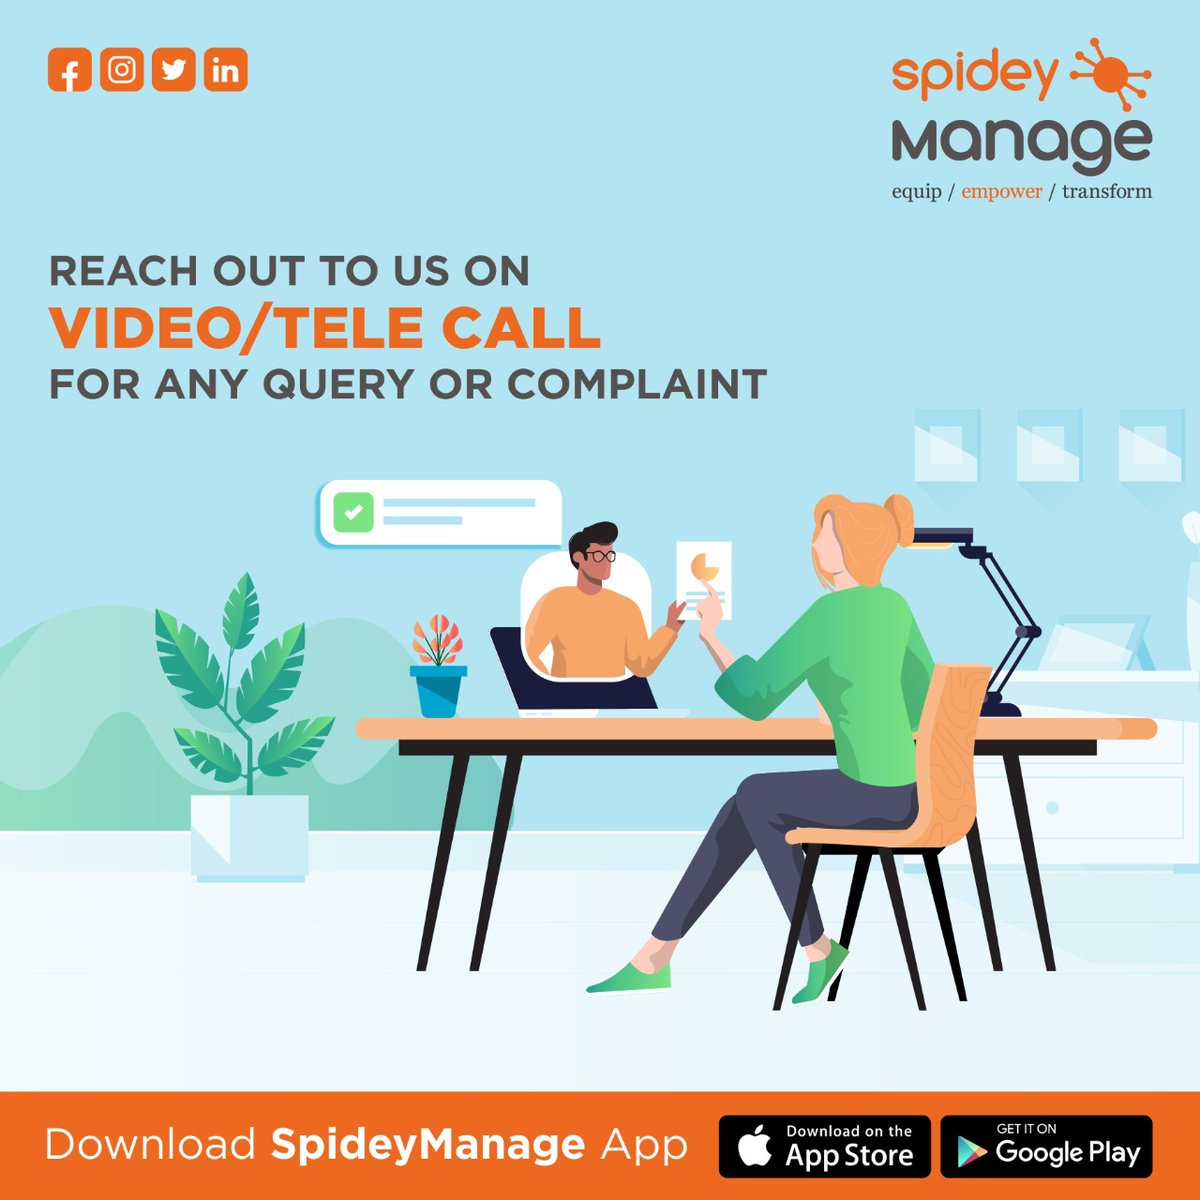 Reach out to us on Video/Tele call for any query or complaint.
.
.
#spideymanage #apartmentmanagement #VMS #bookamenities #Equip #Empower #Transform #visitormanagementsystem #covid19 #coronatimes #SOSSYSTEM #SOS #NoticeBoard #digitalnotice #digitalnoticeboard